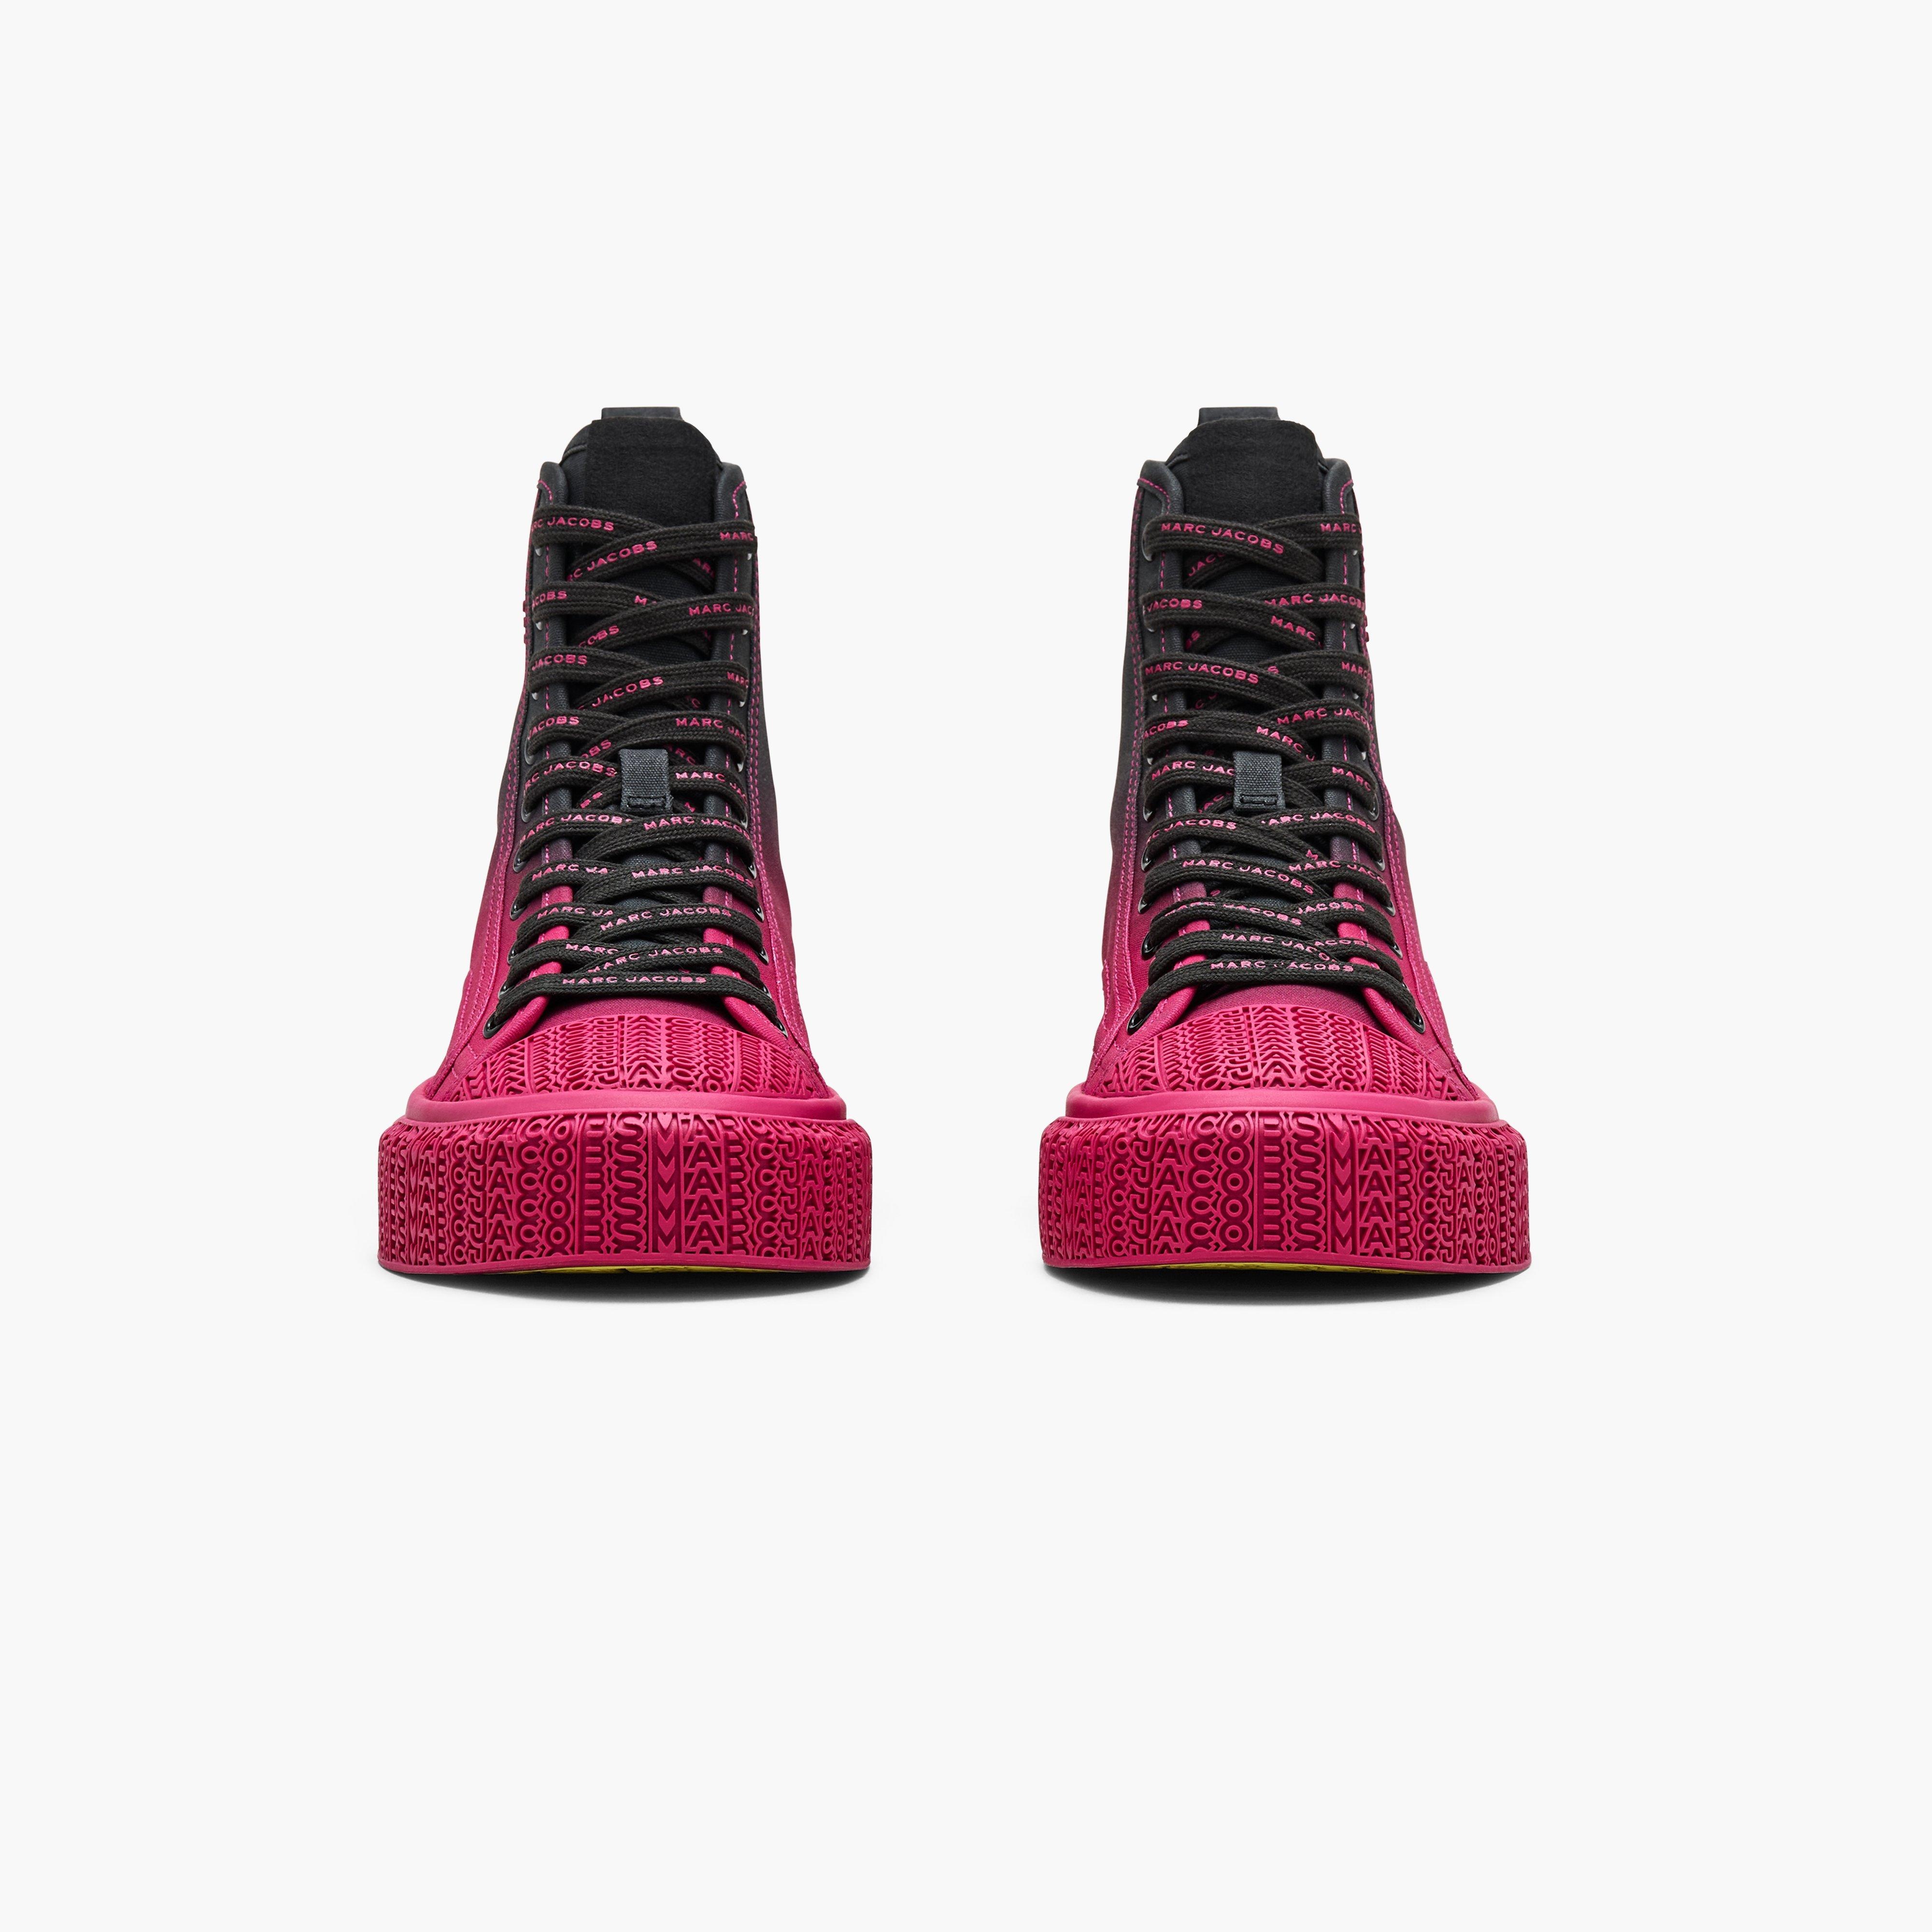 THE OMBRE HIGH TOP SNEAKER - 5